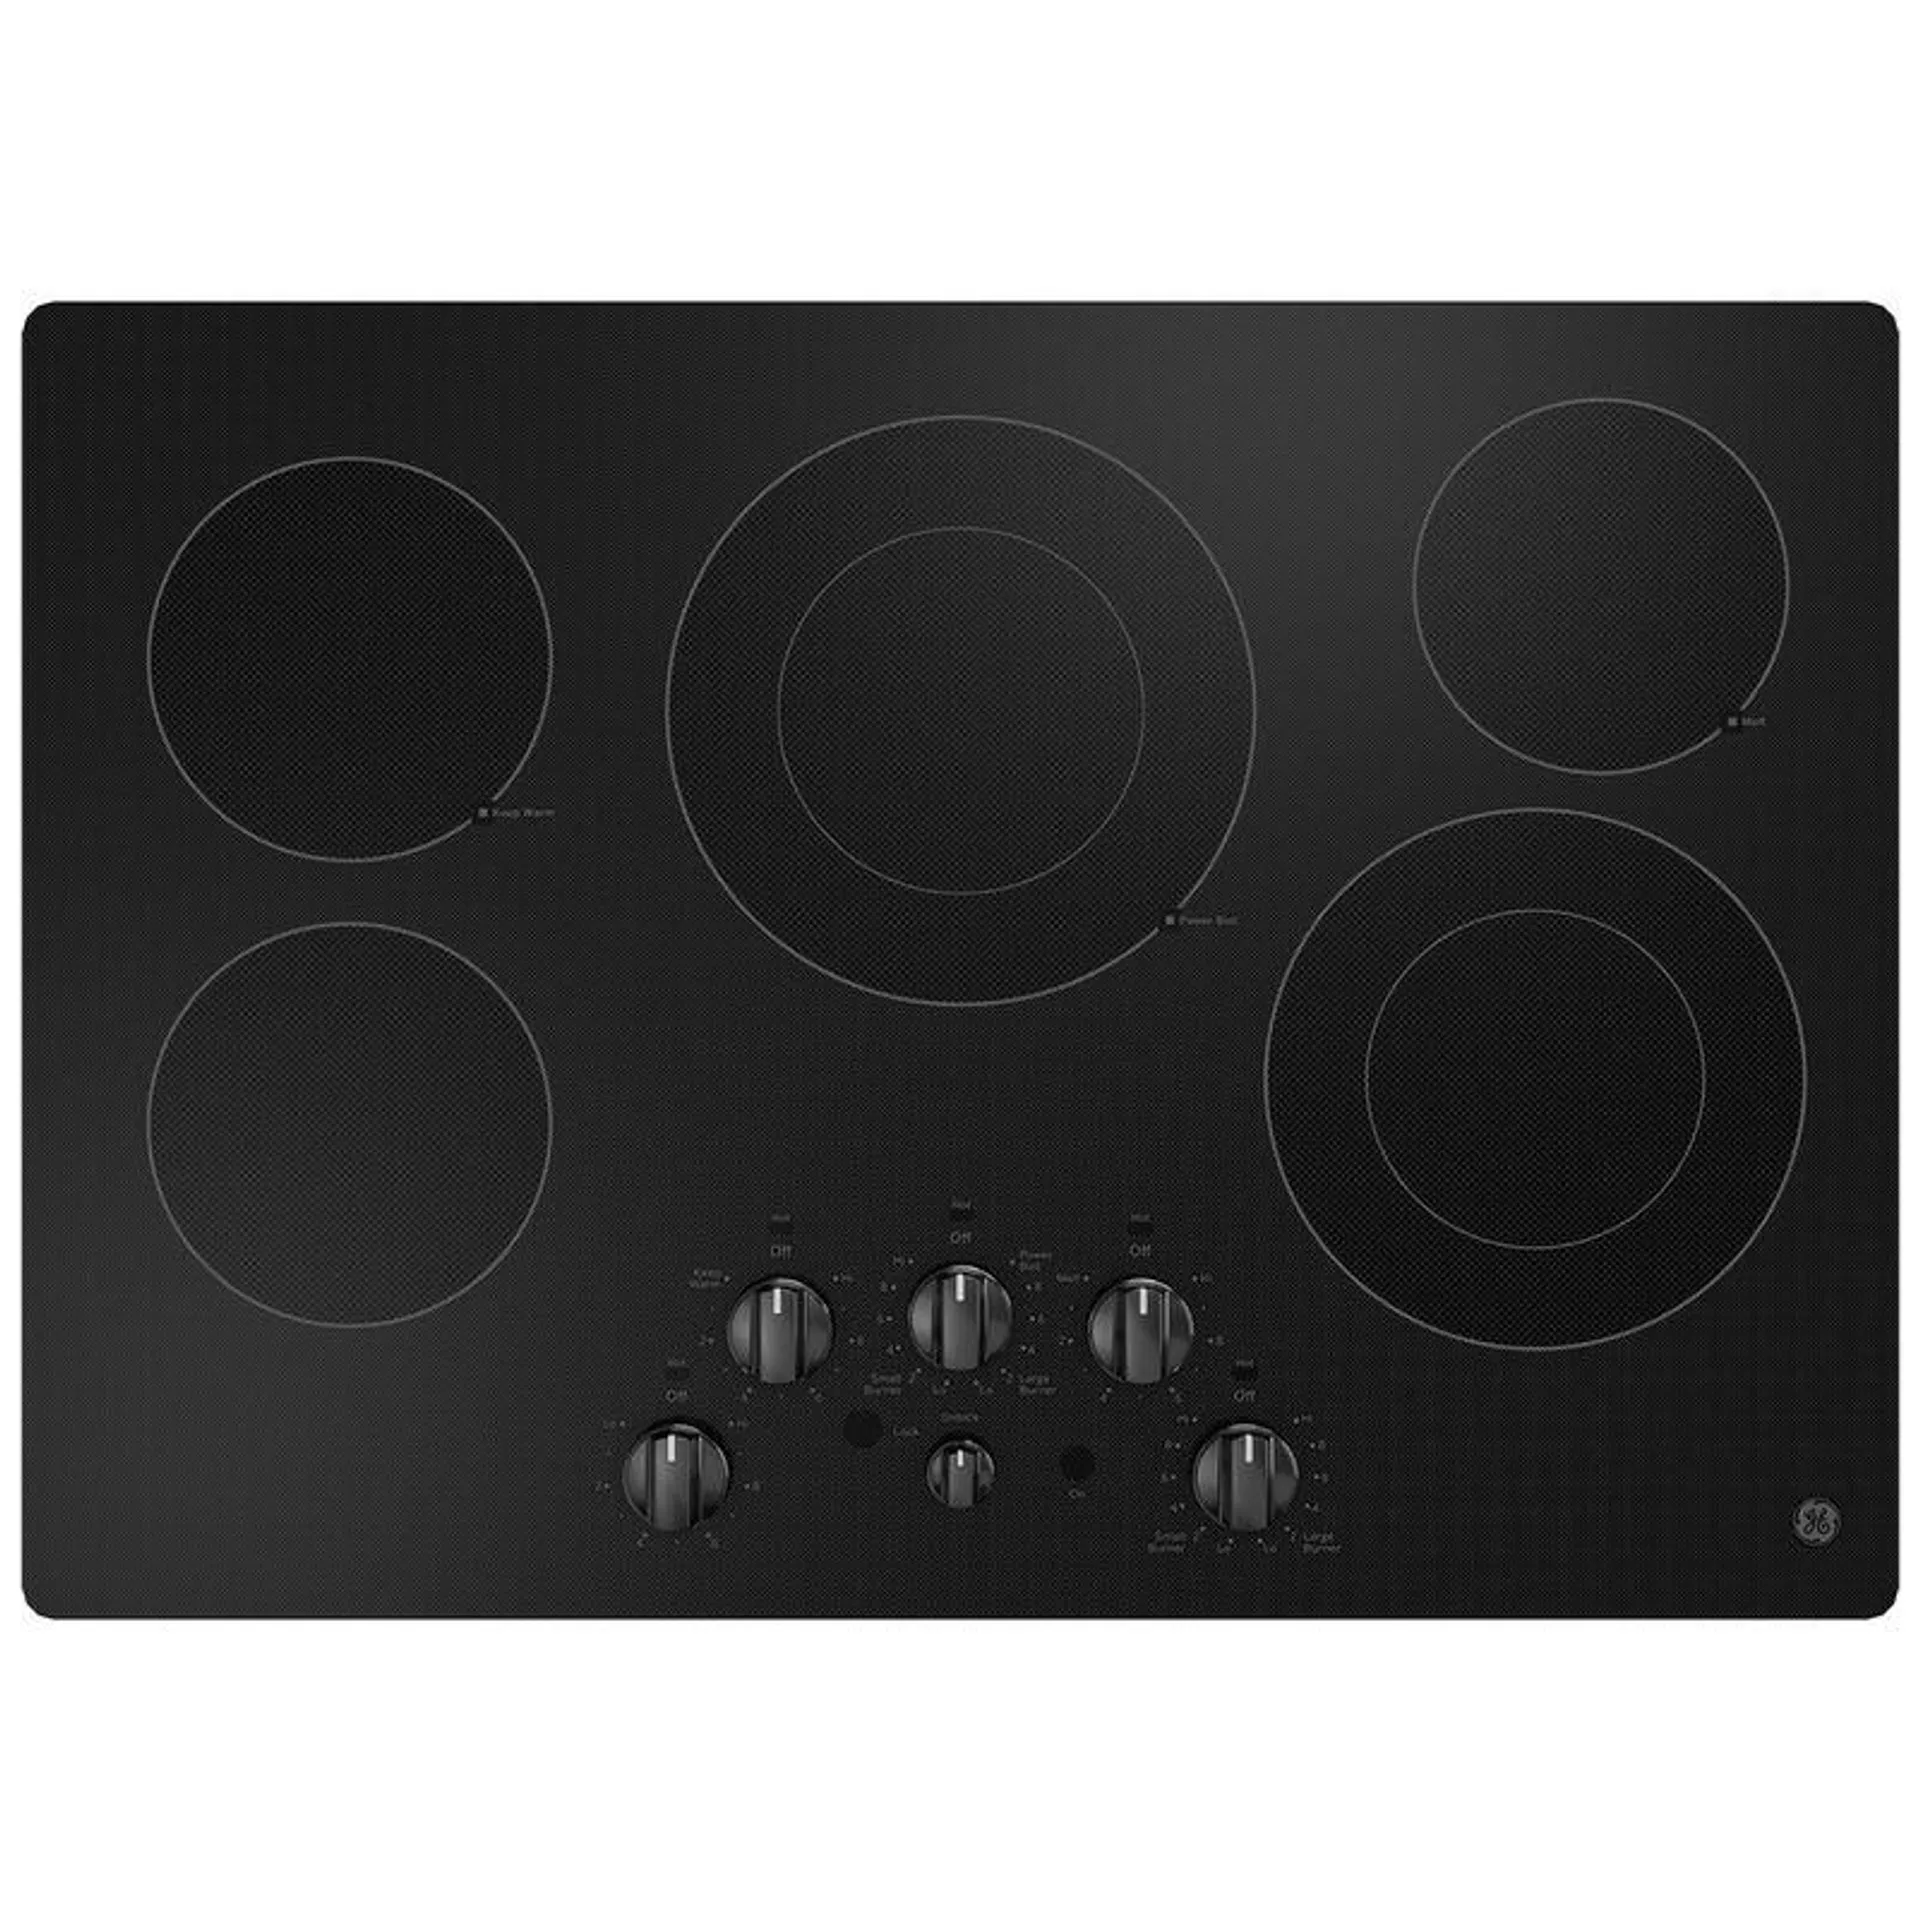 GE 30 in. Electric Cooktop with 5 Smoothtop Burners - Black